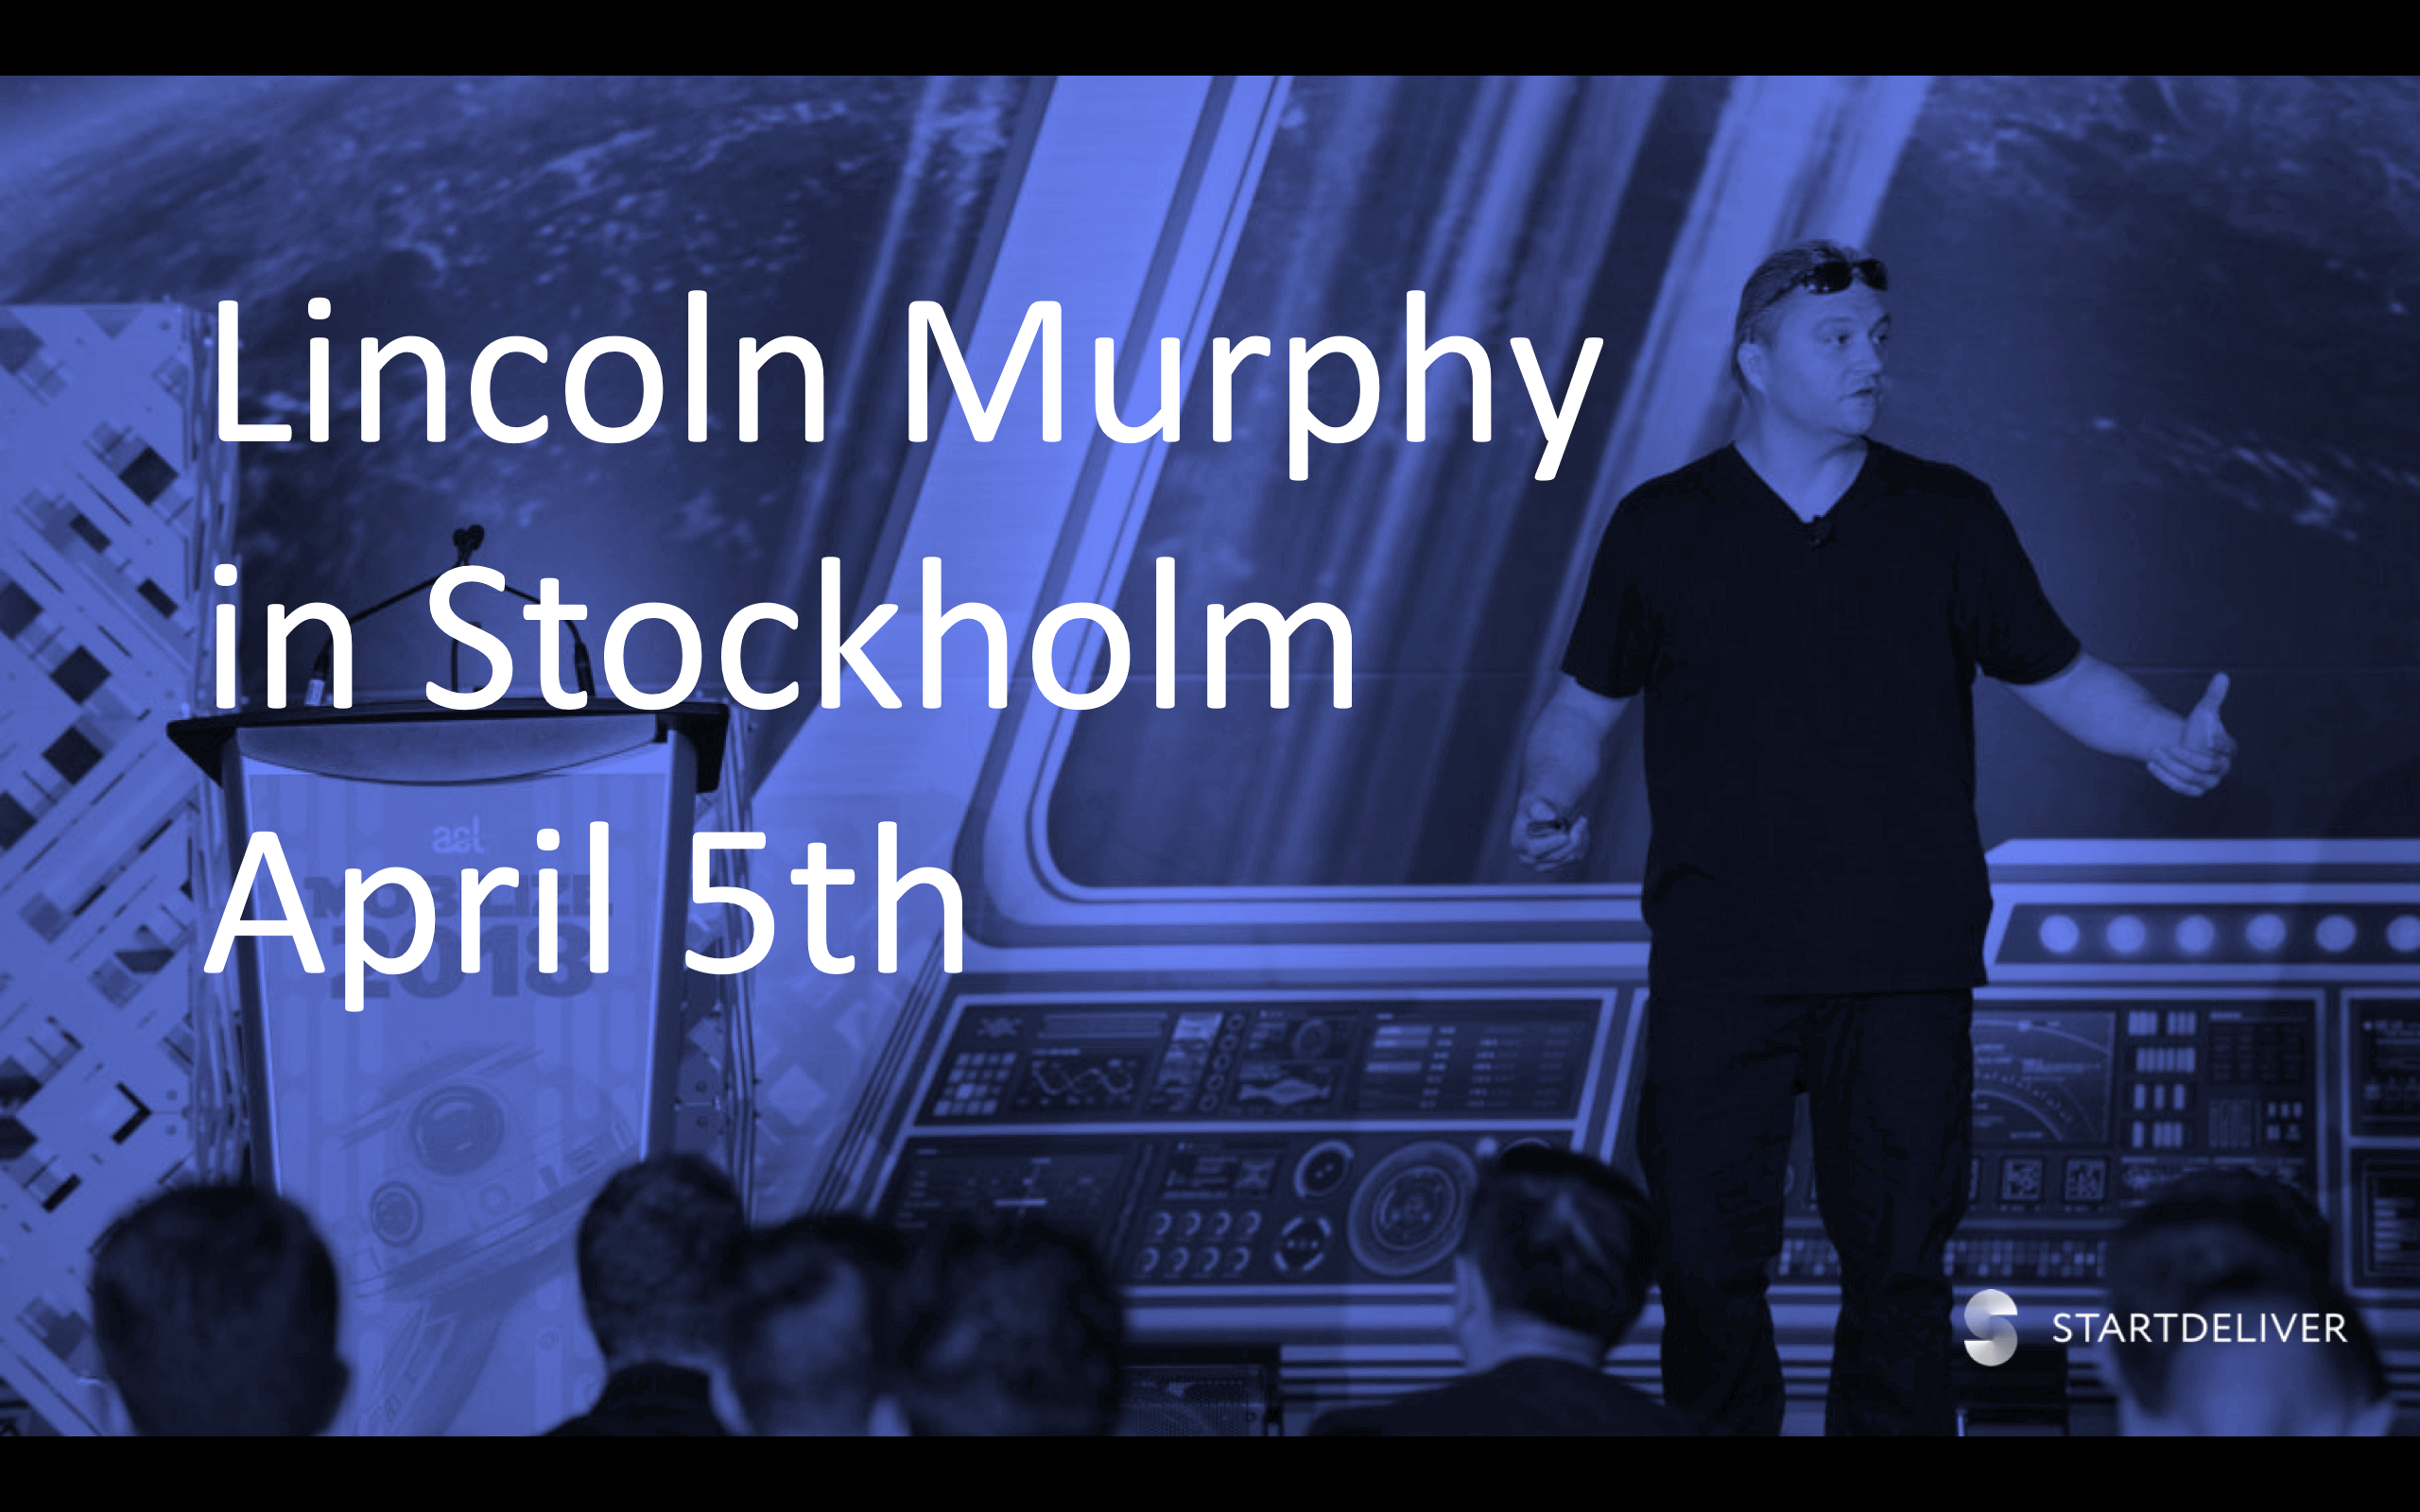 LIVE IN STOCKHOLM: Lincoln Murphy